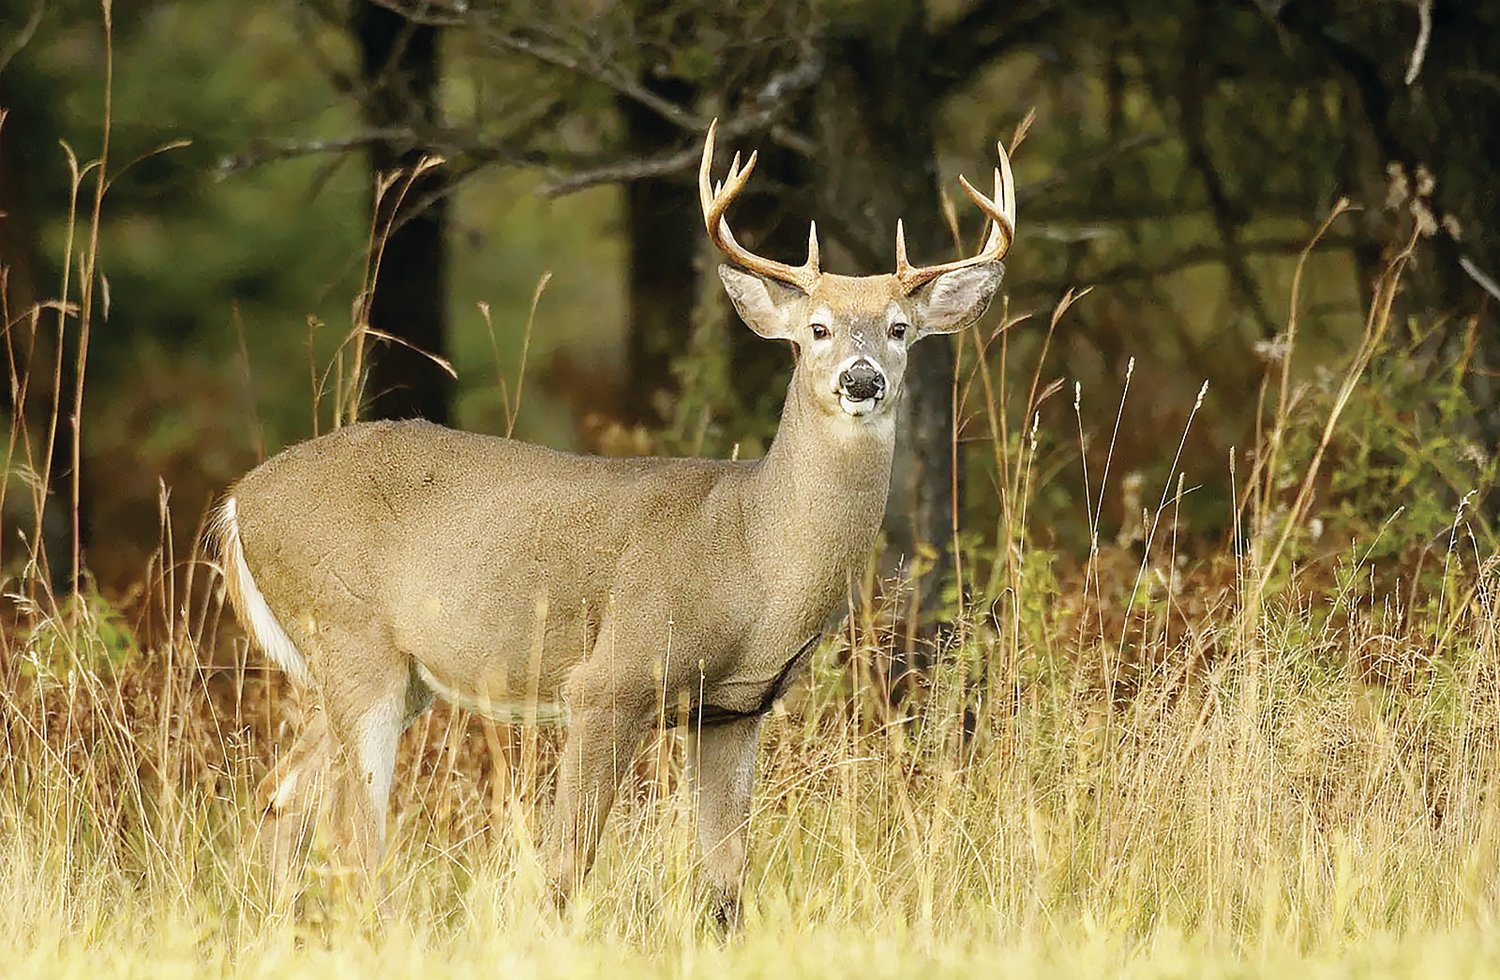 The Missouri Department of Conservation reports as of Nov. 22, 255,754 deer have been harvested across the state in 2022, including 2,411 in Randolph County.